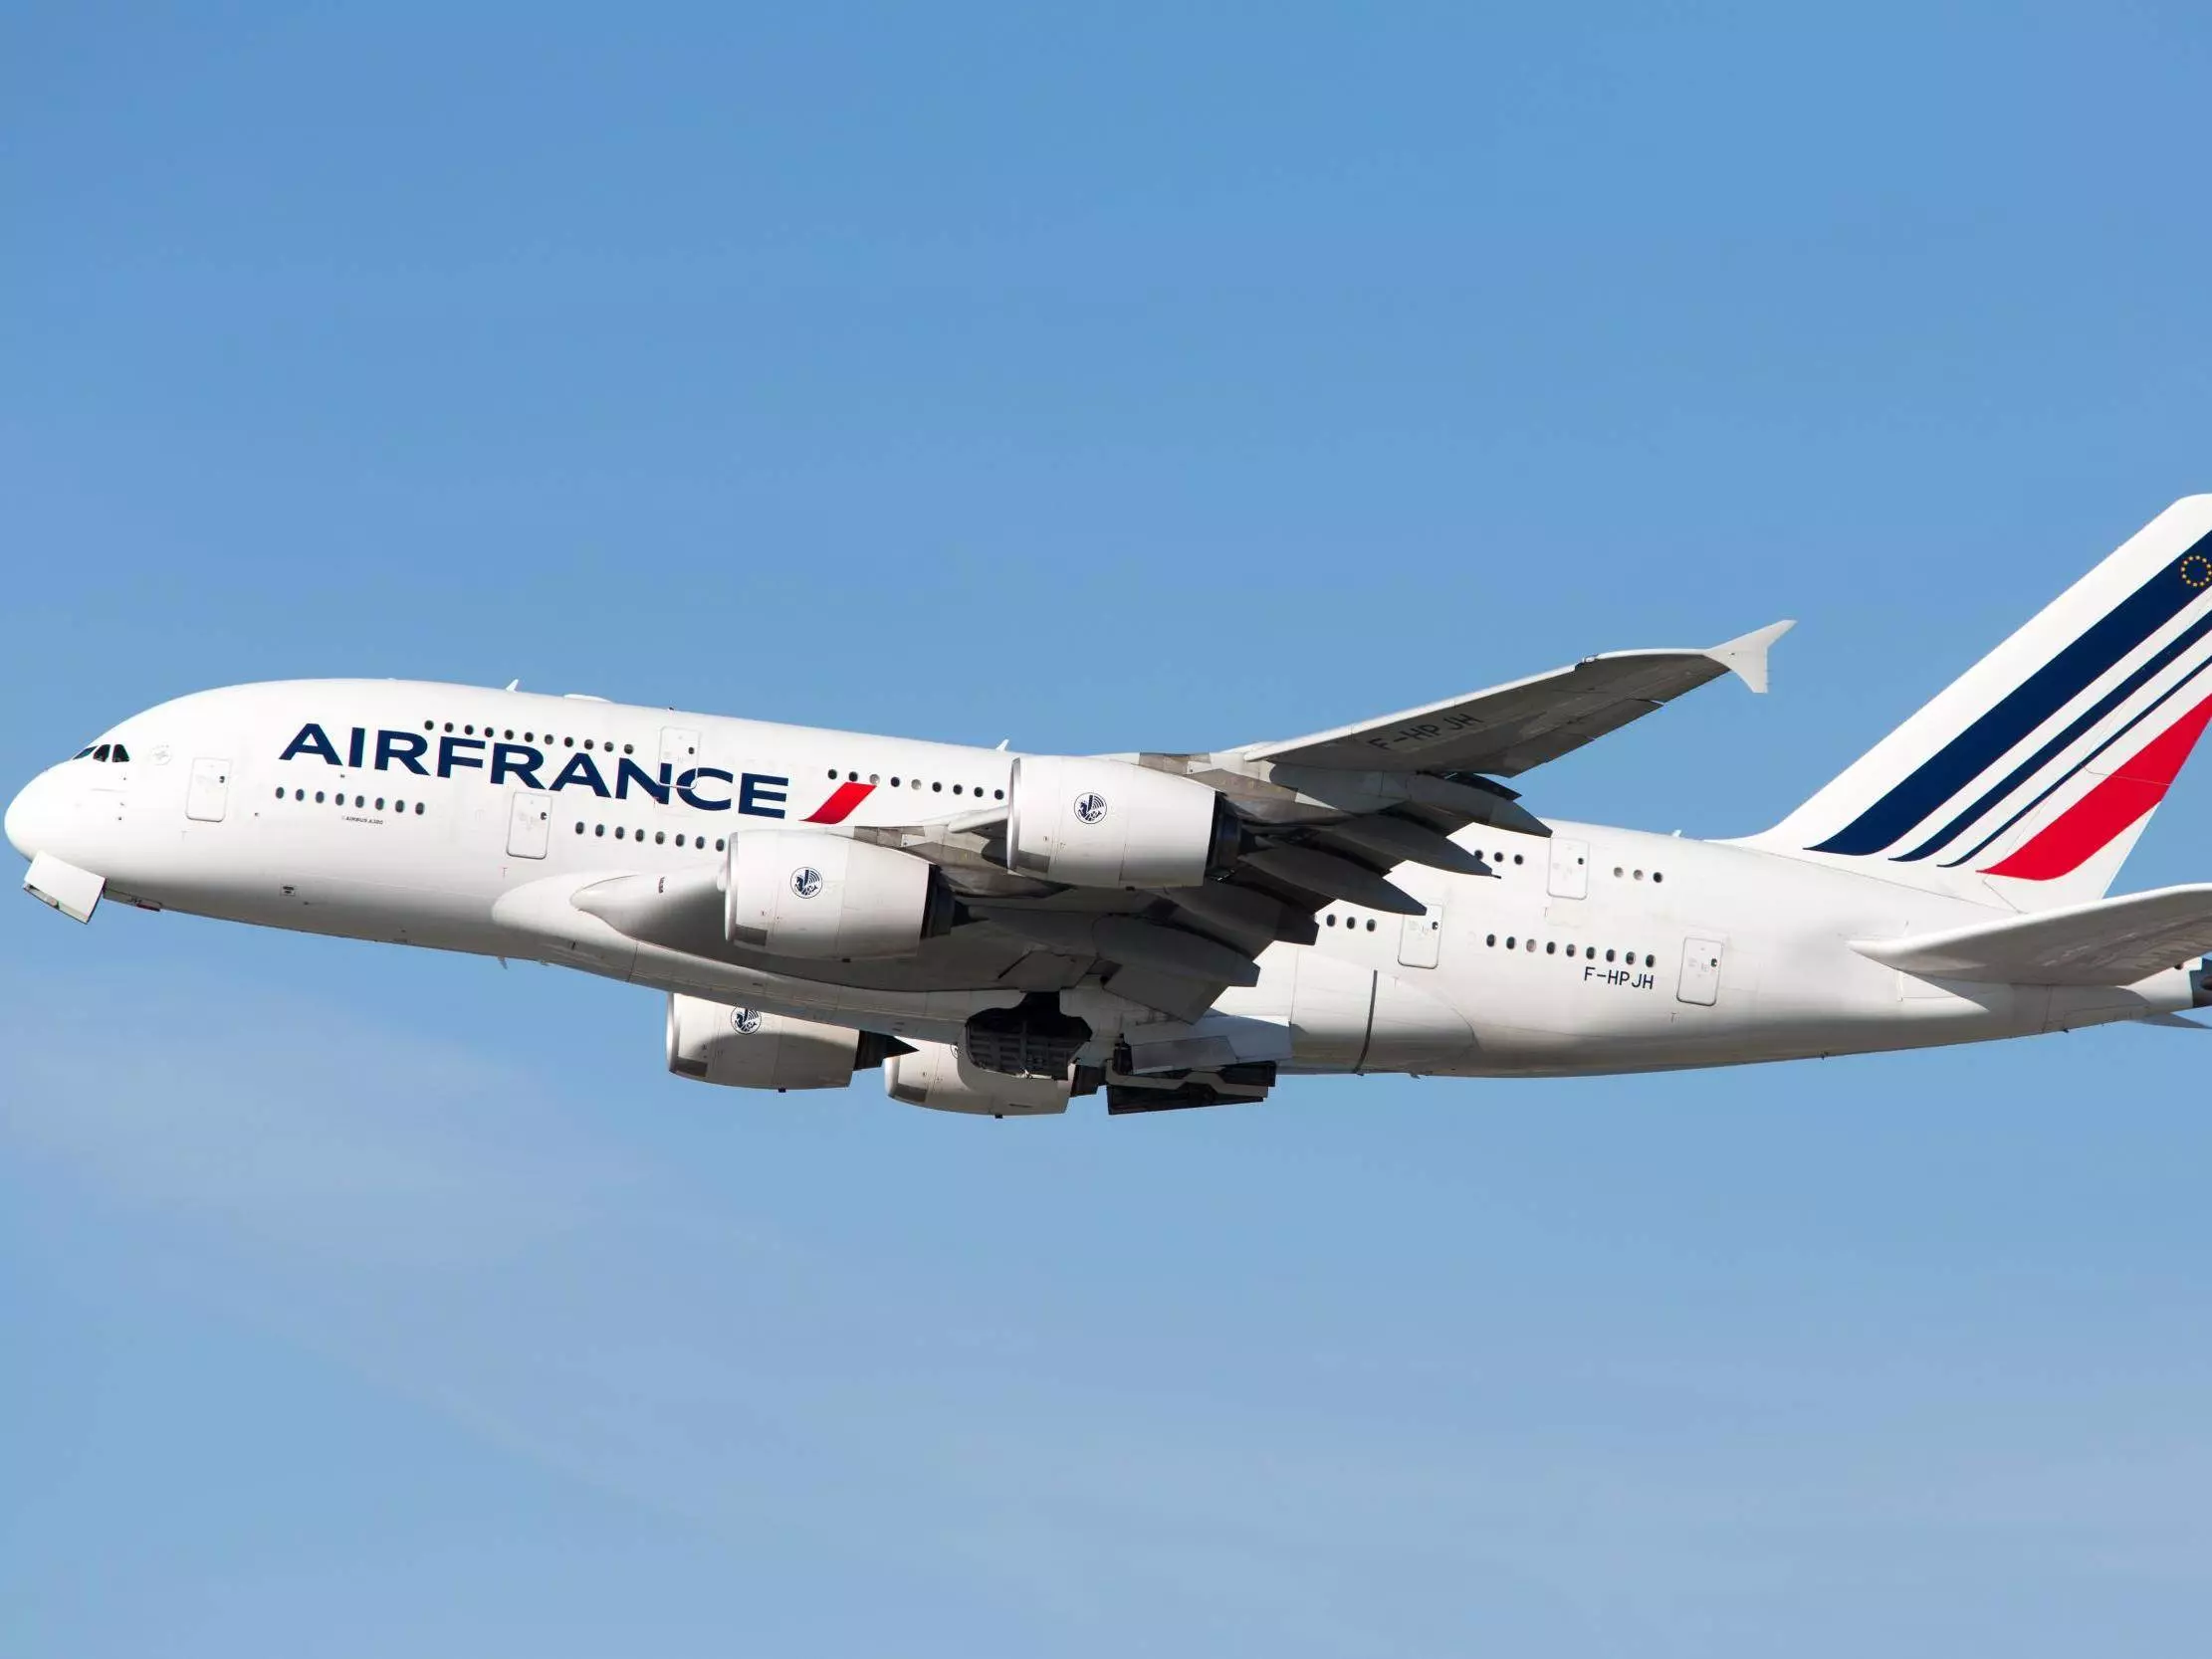 Air france - contact us - official website